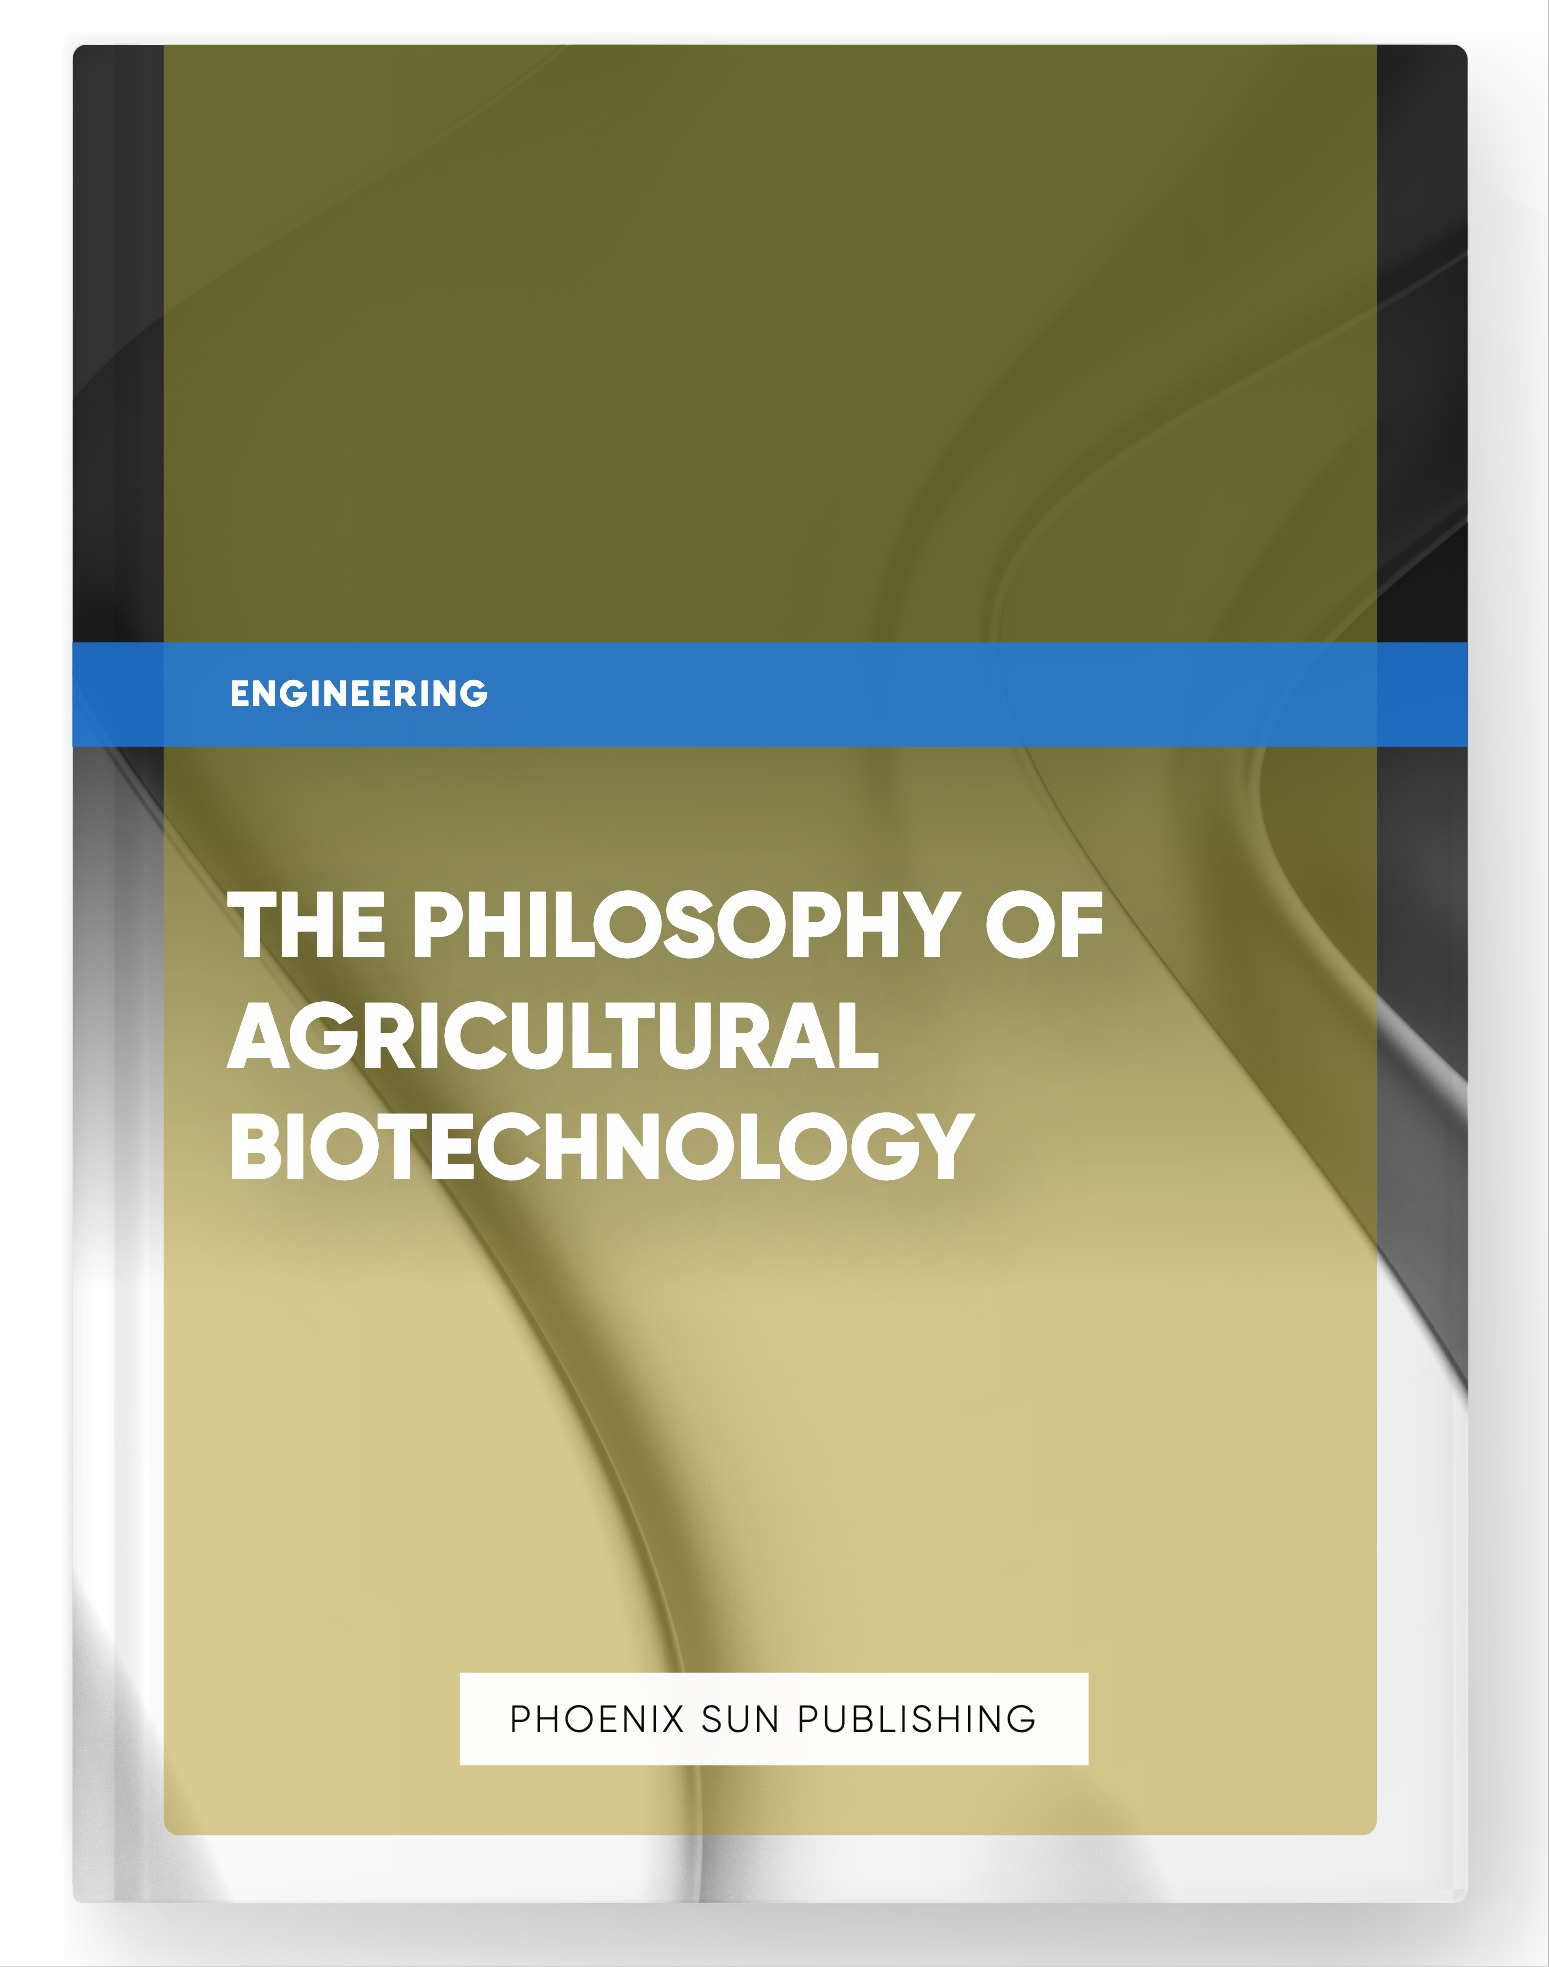 The Philosophy of Agricultural Biotechnology